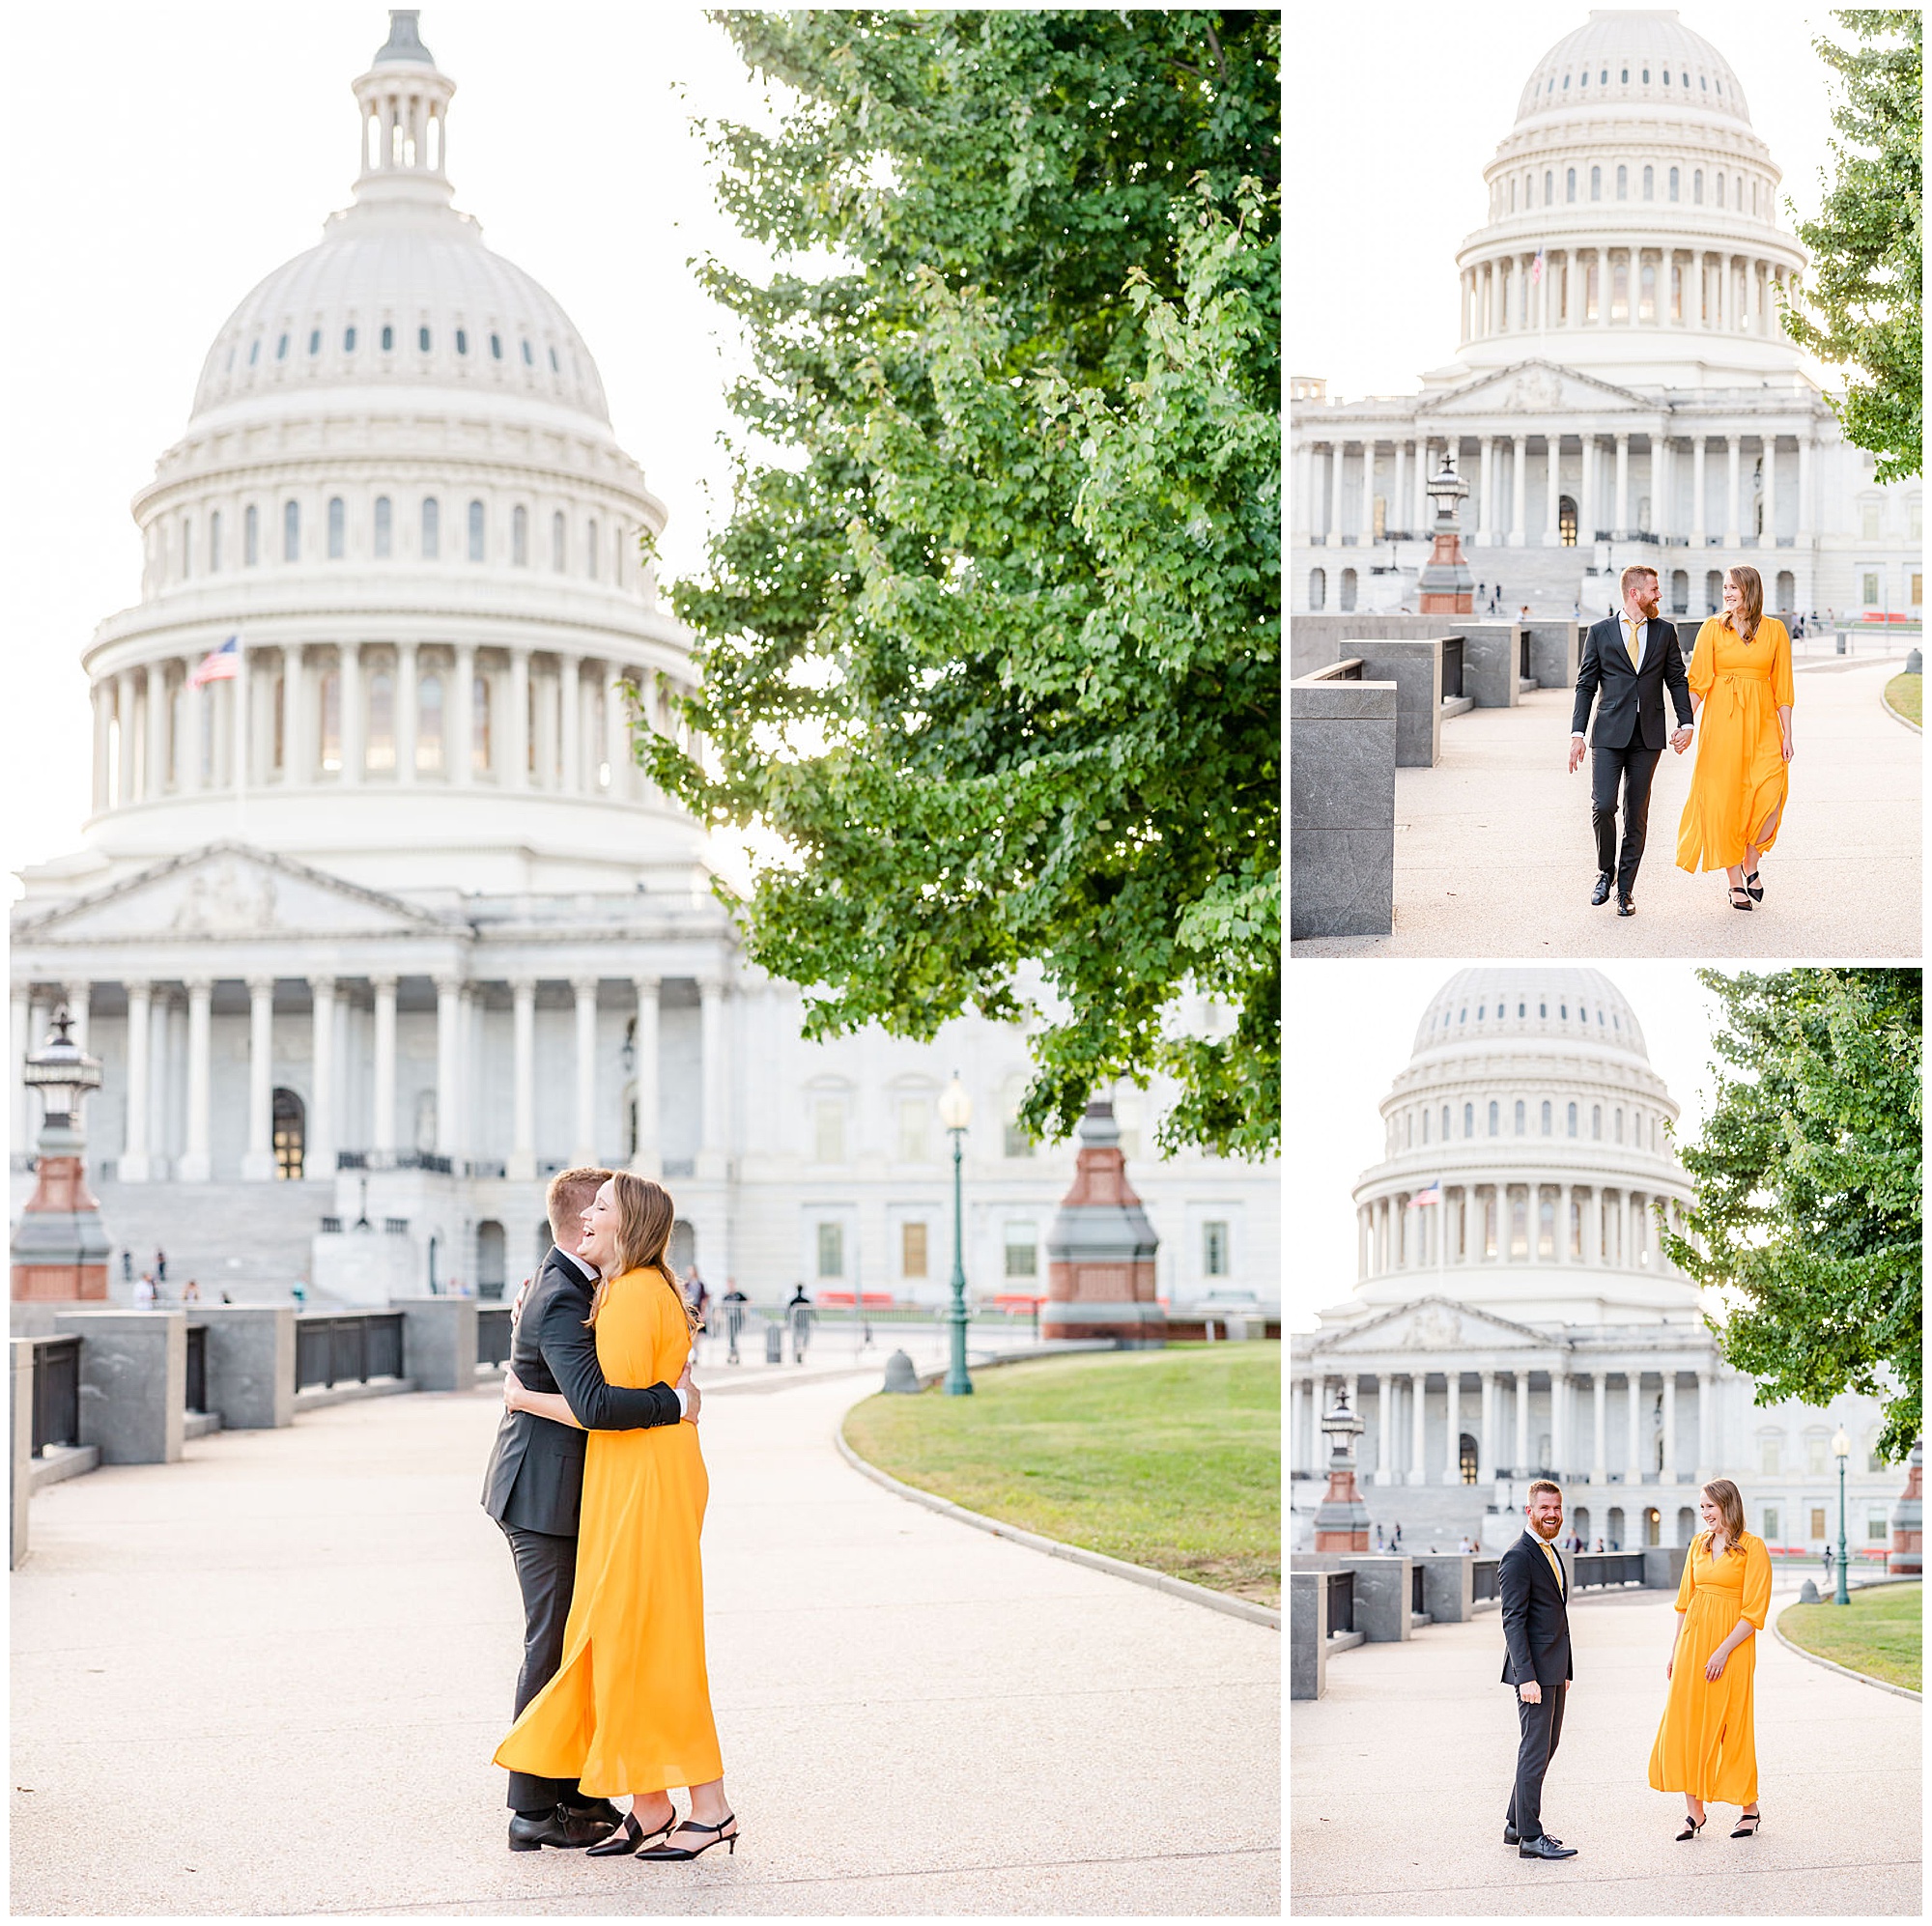 glowing Capitol Hill elopement portraits, Capitol Hill Washington DC, DC elopement portraits, DC elopement photographer, DC wedding photographer, DC portrait photographer, DC photographer, Capitol Hill portraits, autumn portraits, Capitol Hill photographer, Rachel E.H. Photography, couple hugging, couple standing apart, couple holding hands